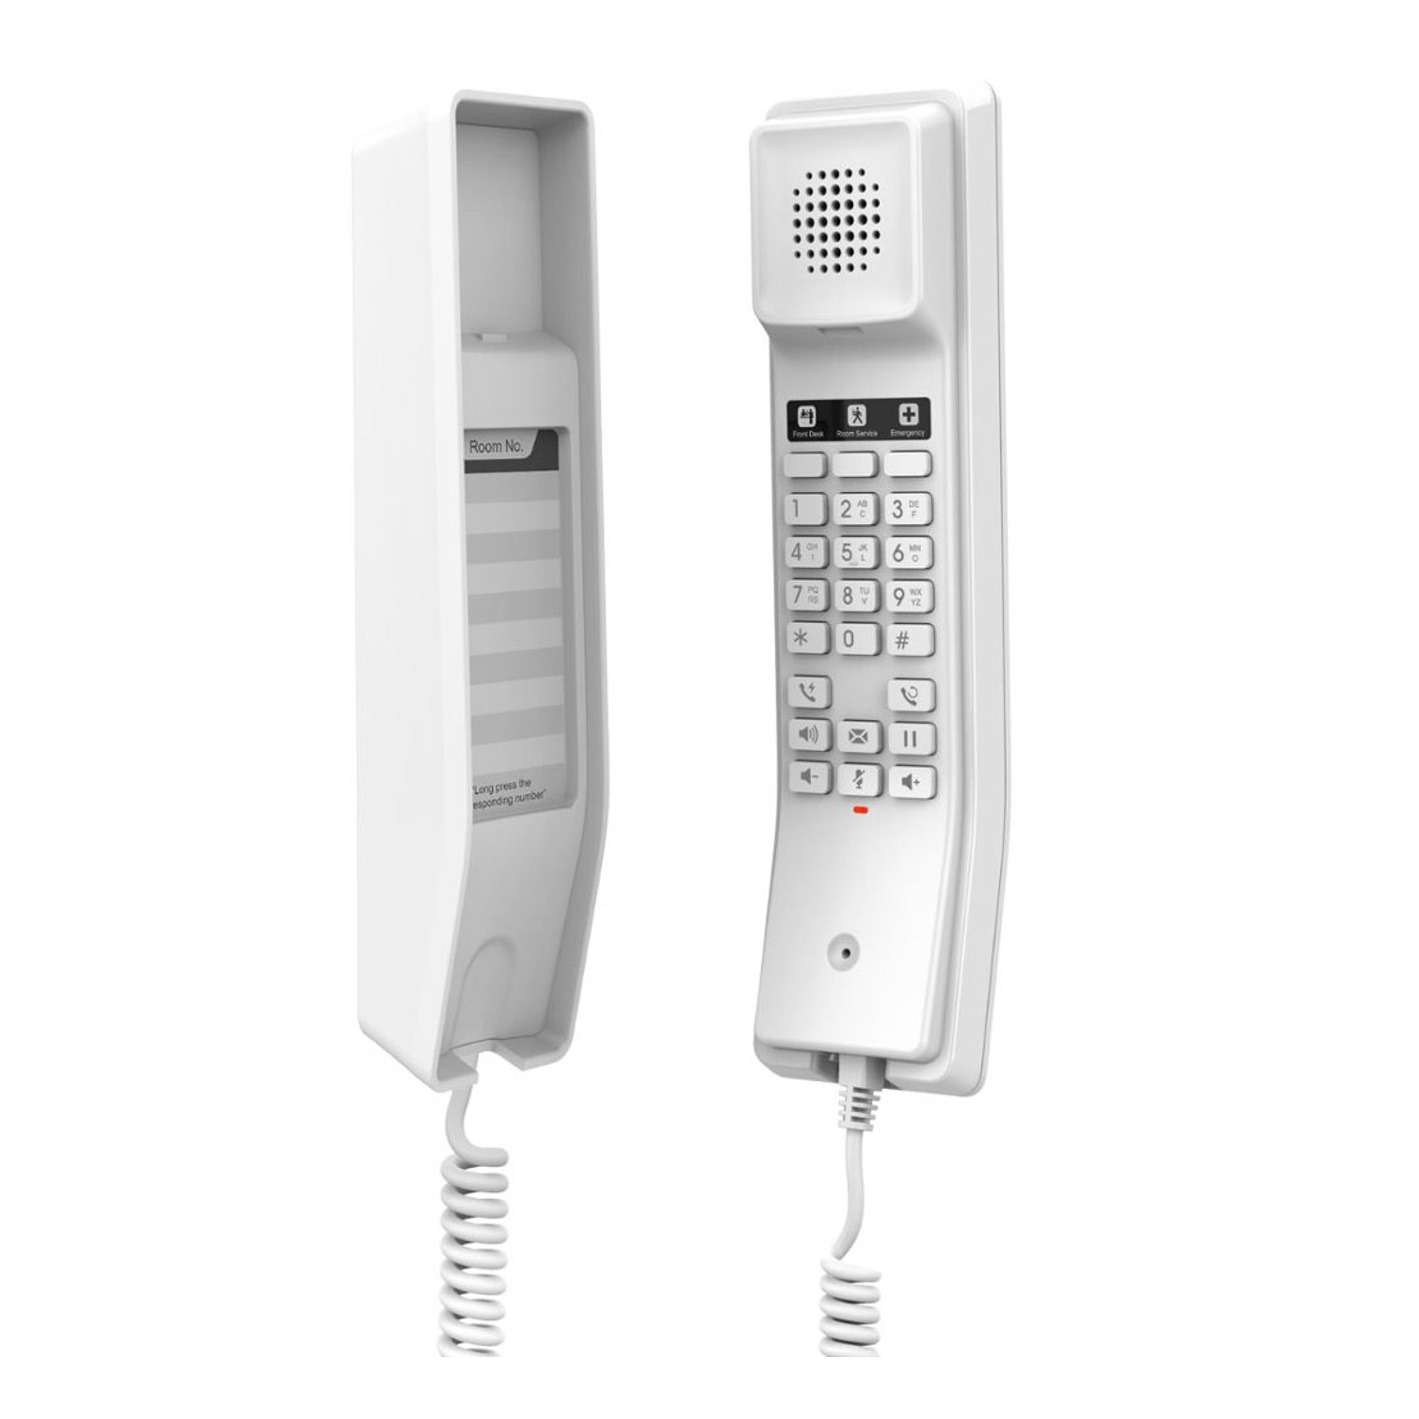 GS-GHP610W Compact Hotel Phone w/built-in WiFi - WHITE by Grandstream